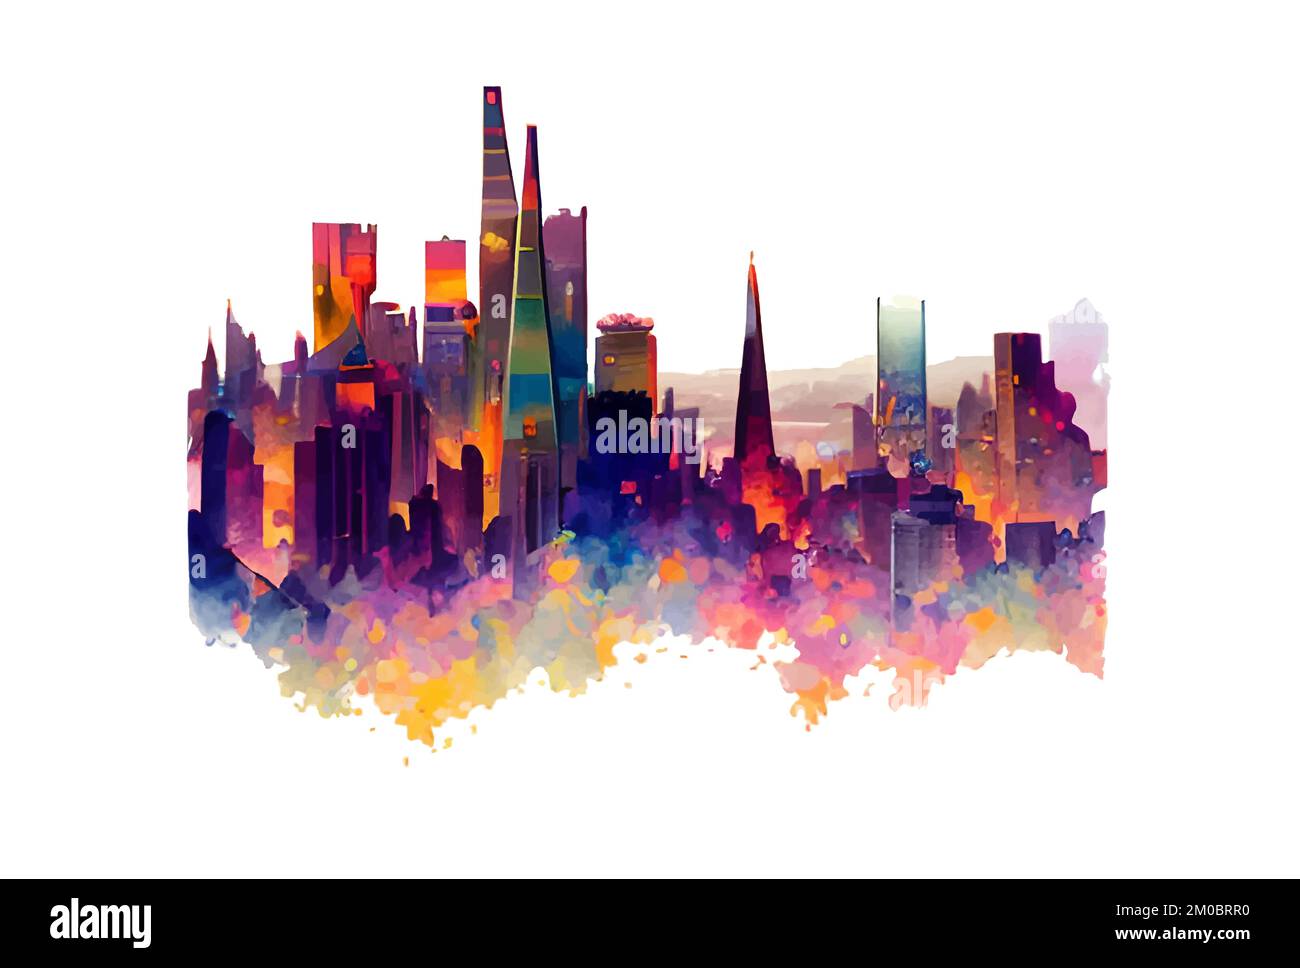 Vector city with skyscrapers skyline illustration in watercolors isolated on light background Stock Vector